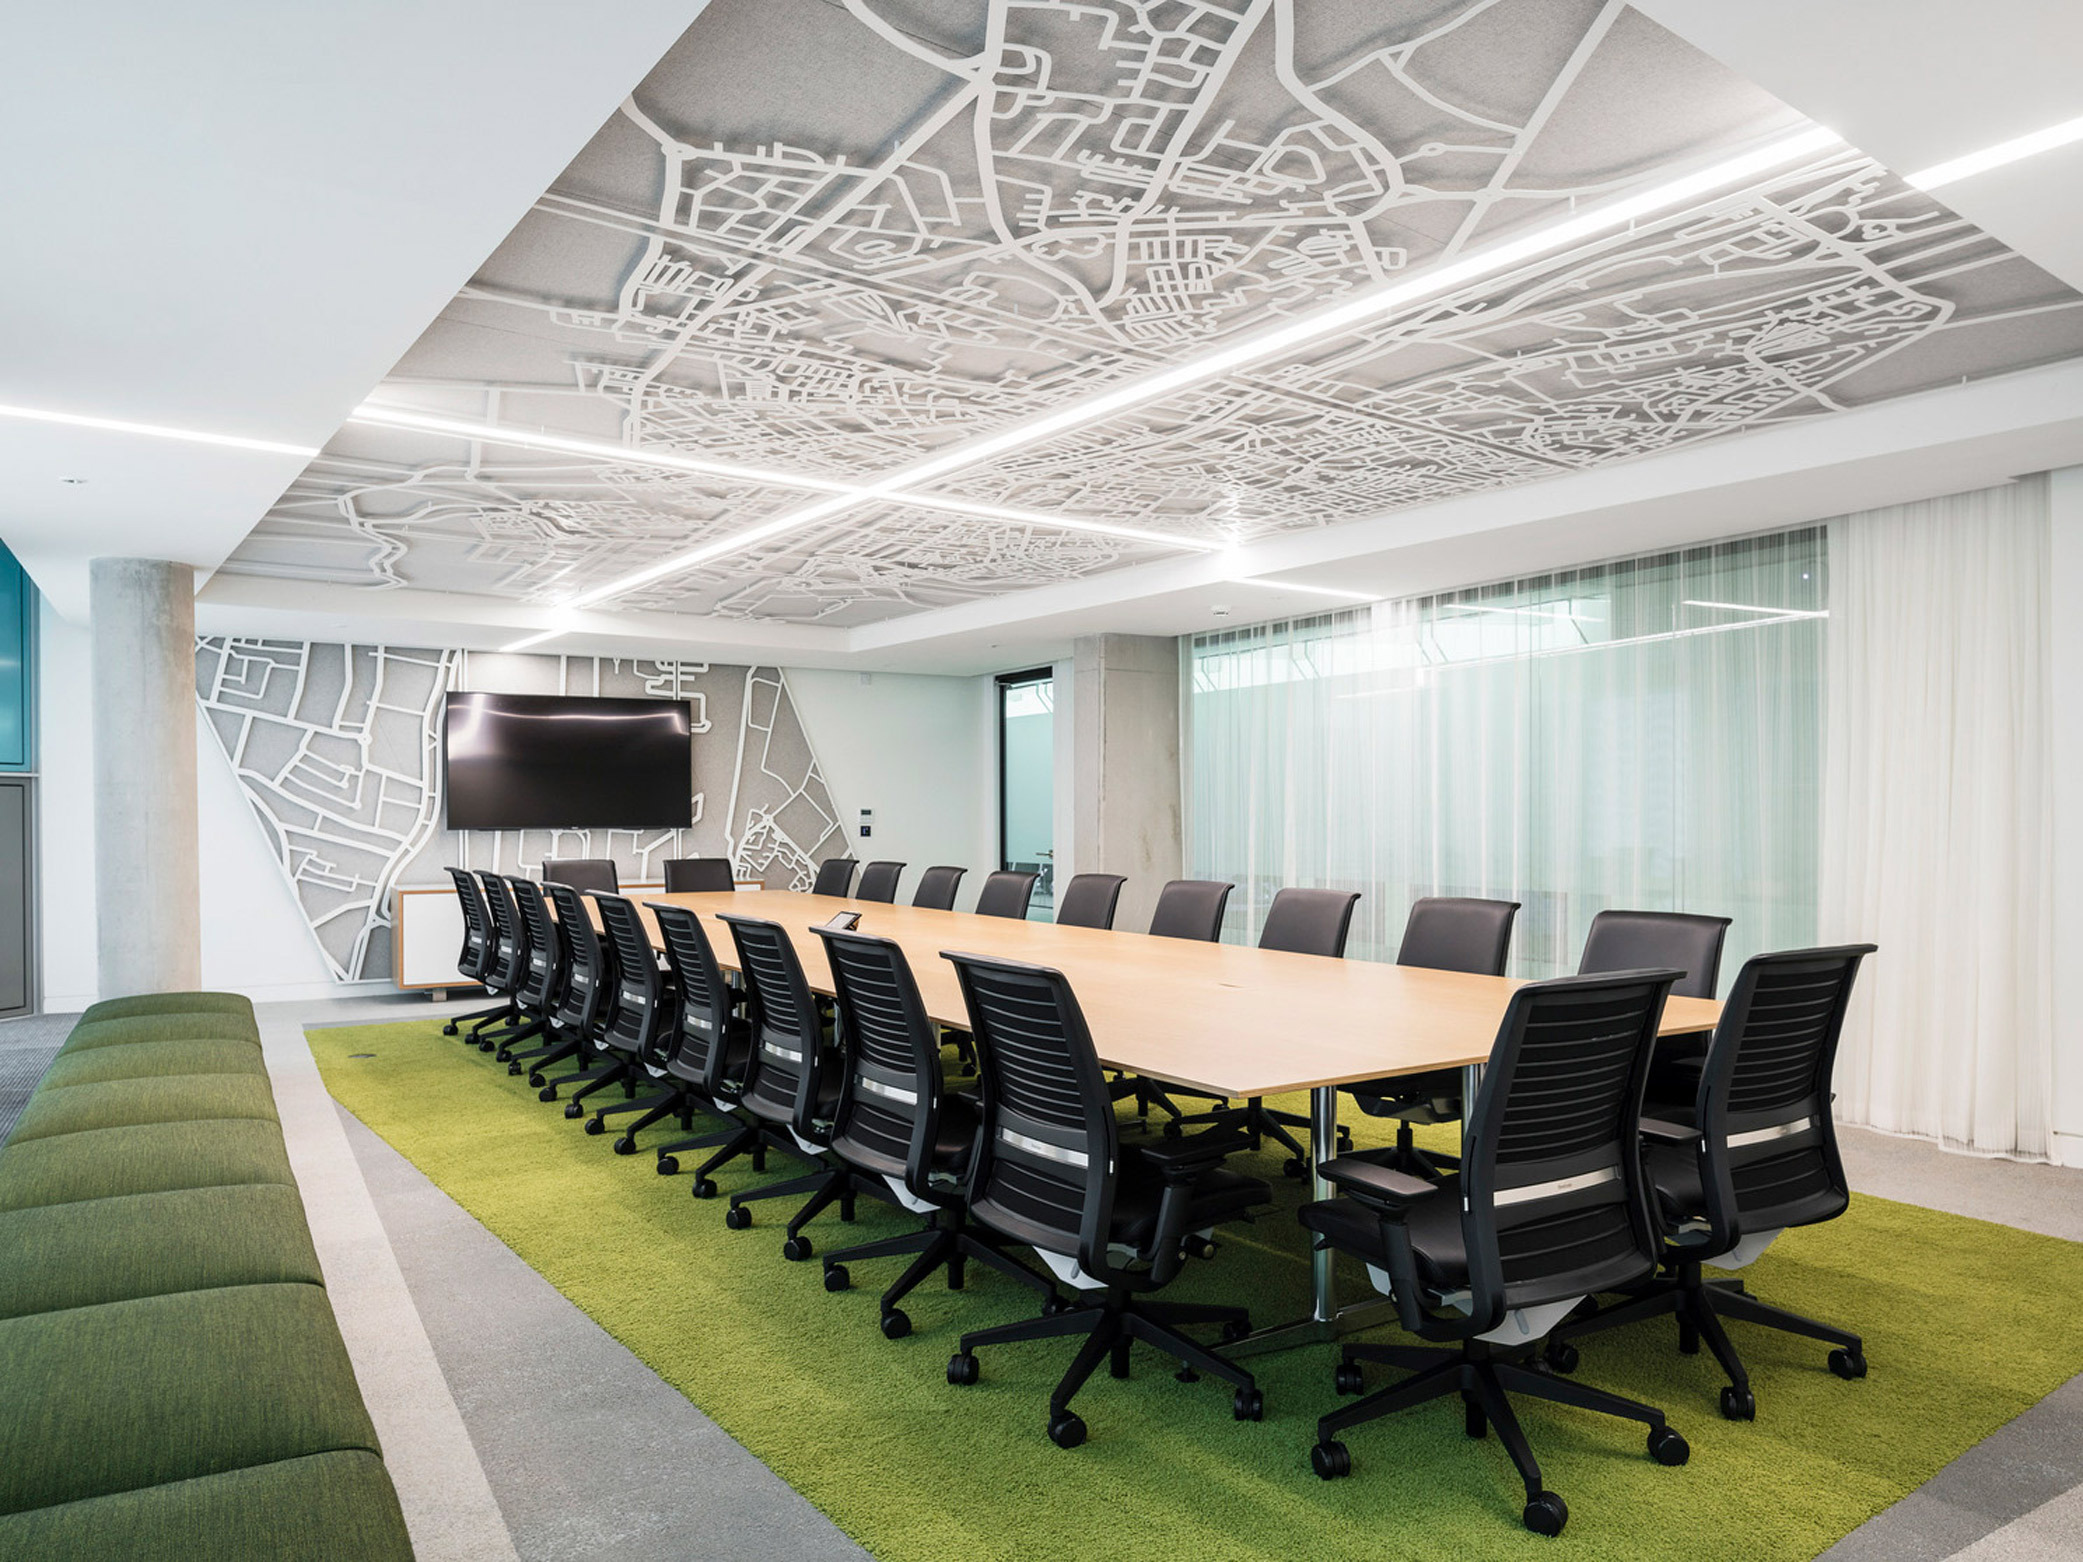 Modern conference room featuring an elongated wooden table surrounded by black office chairs, with a vibrant green carpet mimicking grass. An artistic ceiling panel displays a white abstract city map design, complemented by recessed lighting. Large screen and white drapes adorn the adjacent wall.